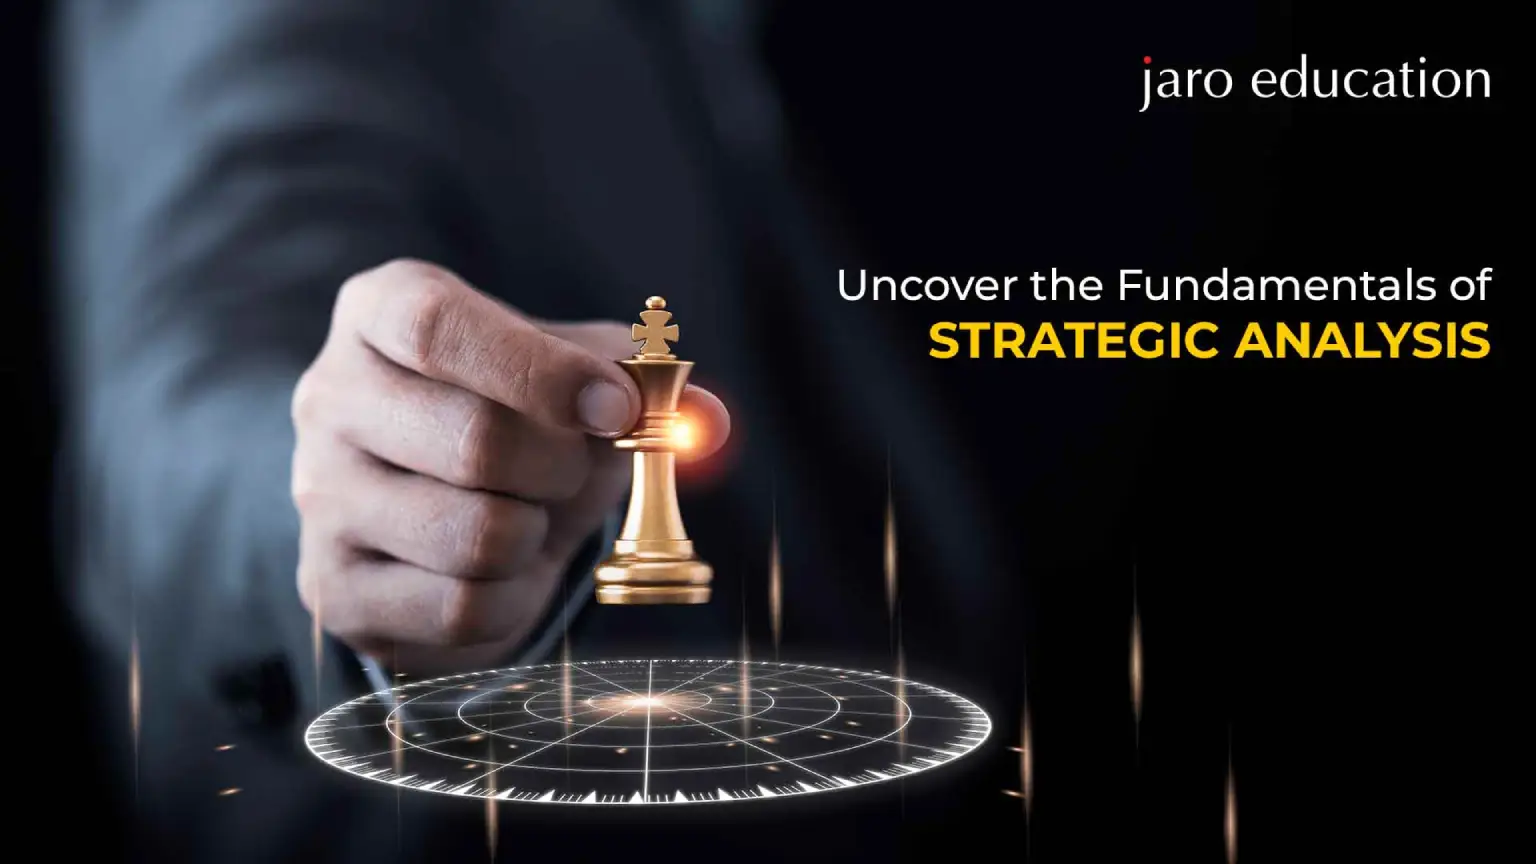 Uncover the Fundamentals ofStrategic Analysis